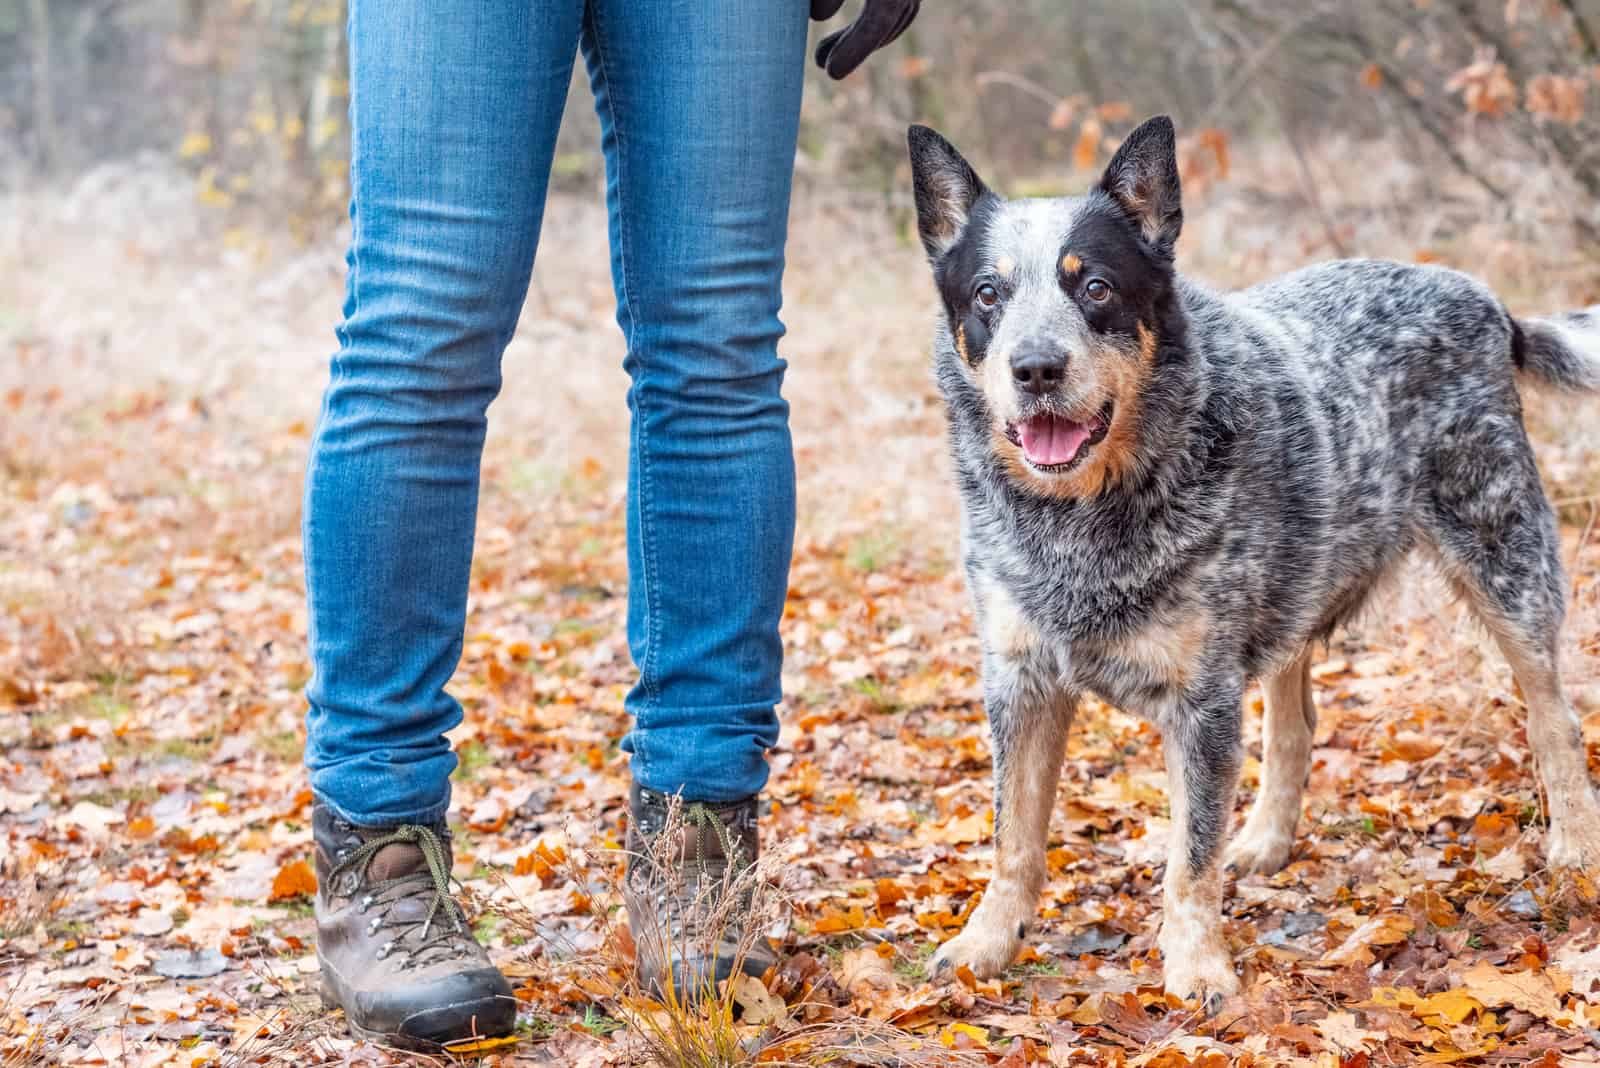 Jack Russell Blue heeler standing by owner in woods